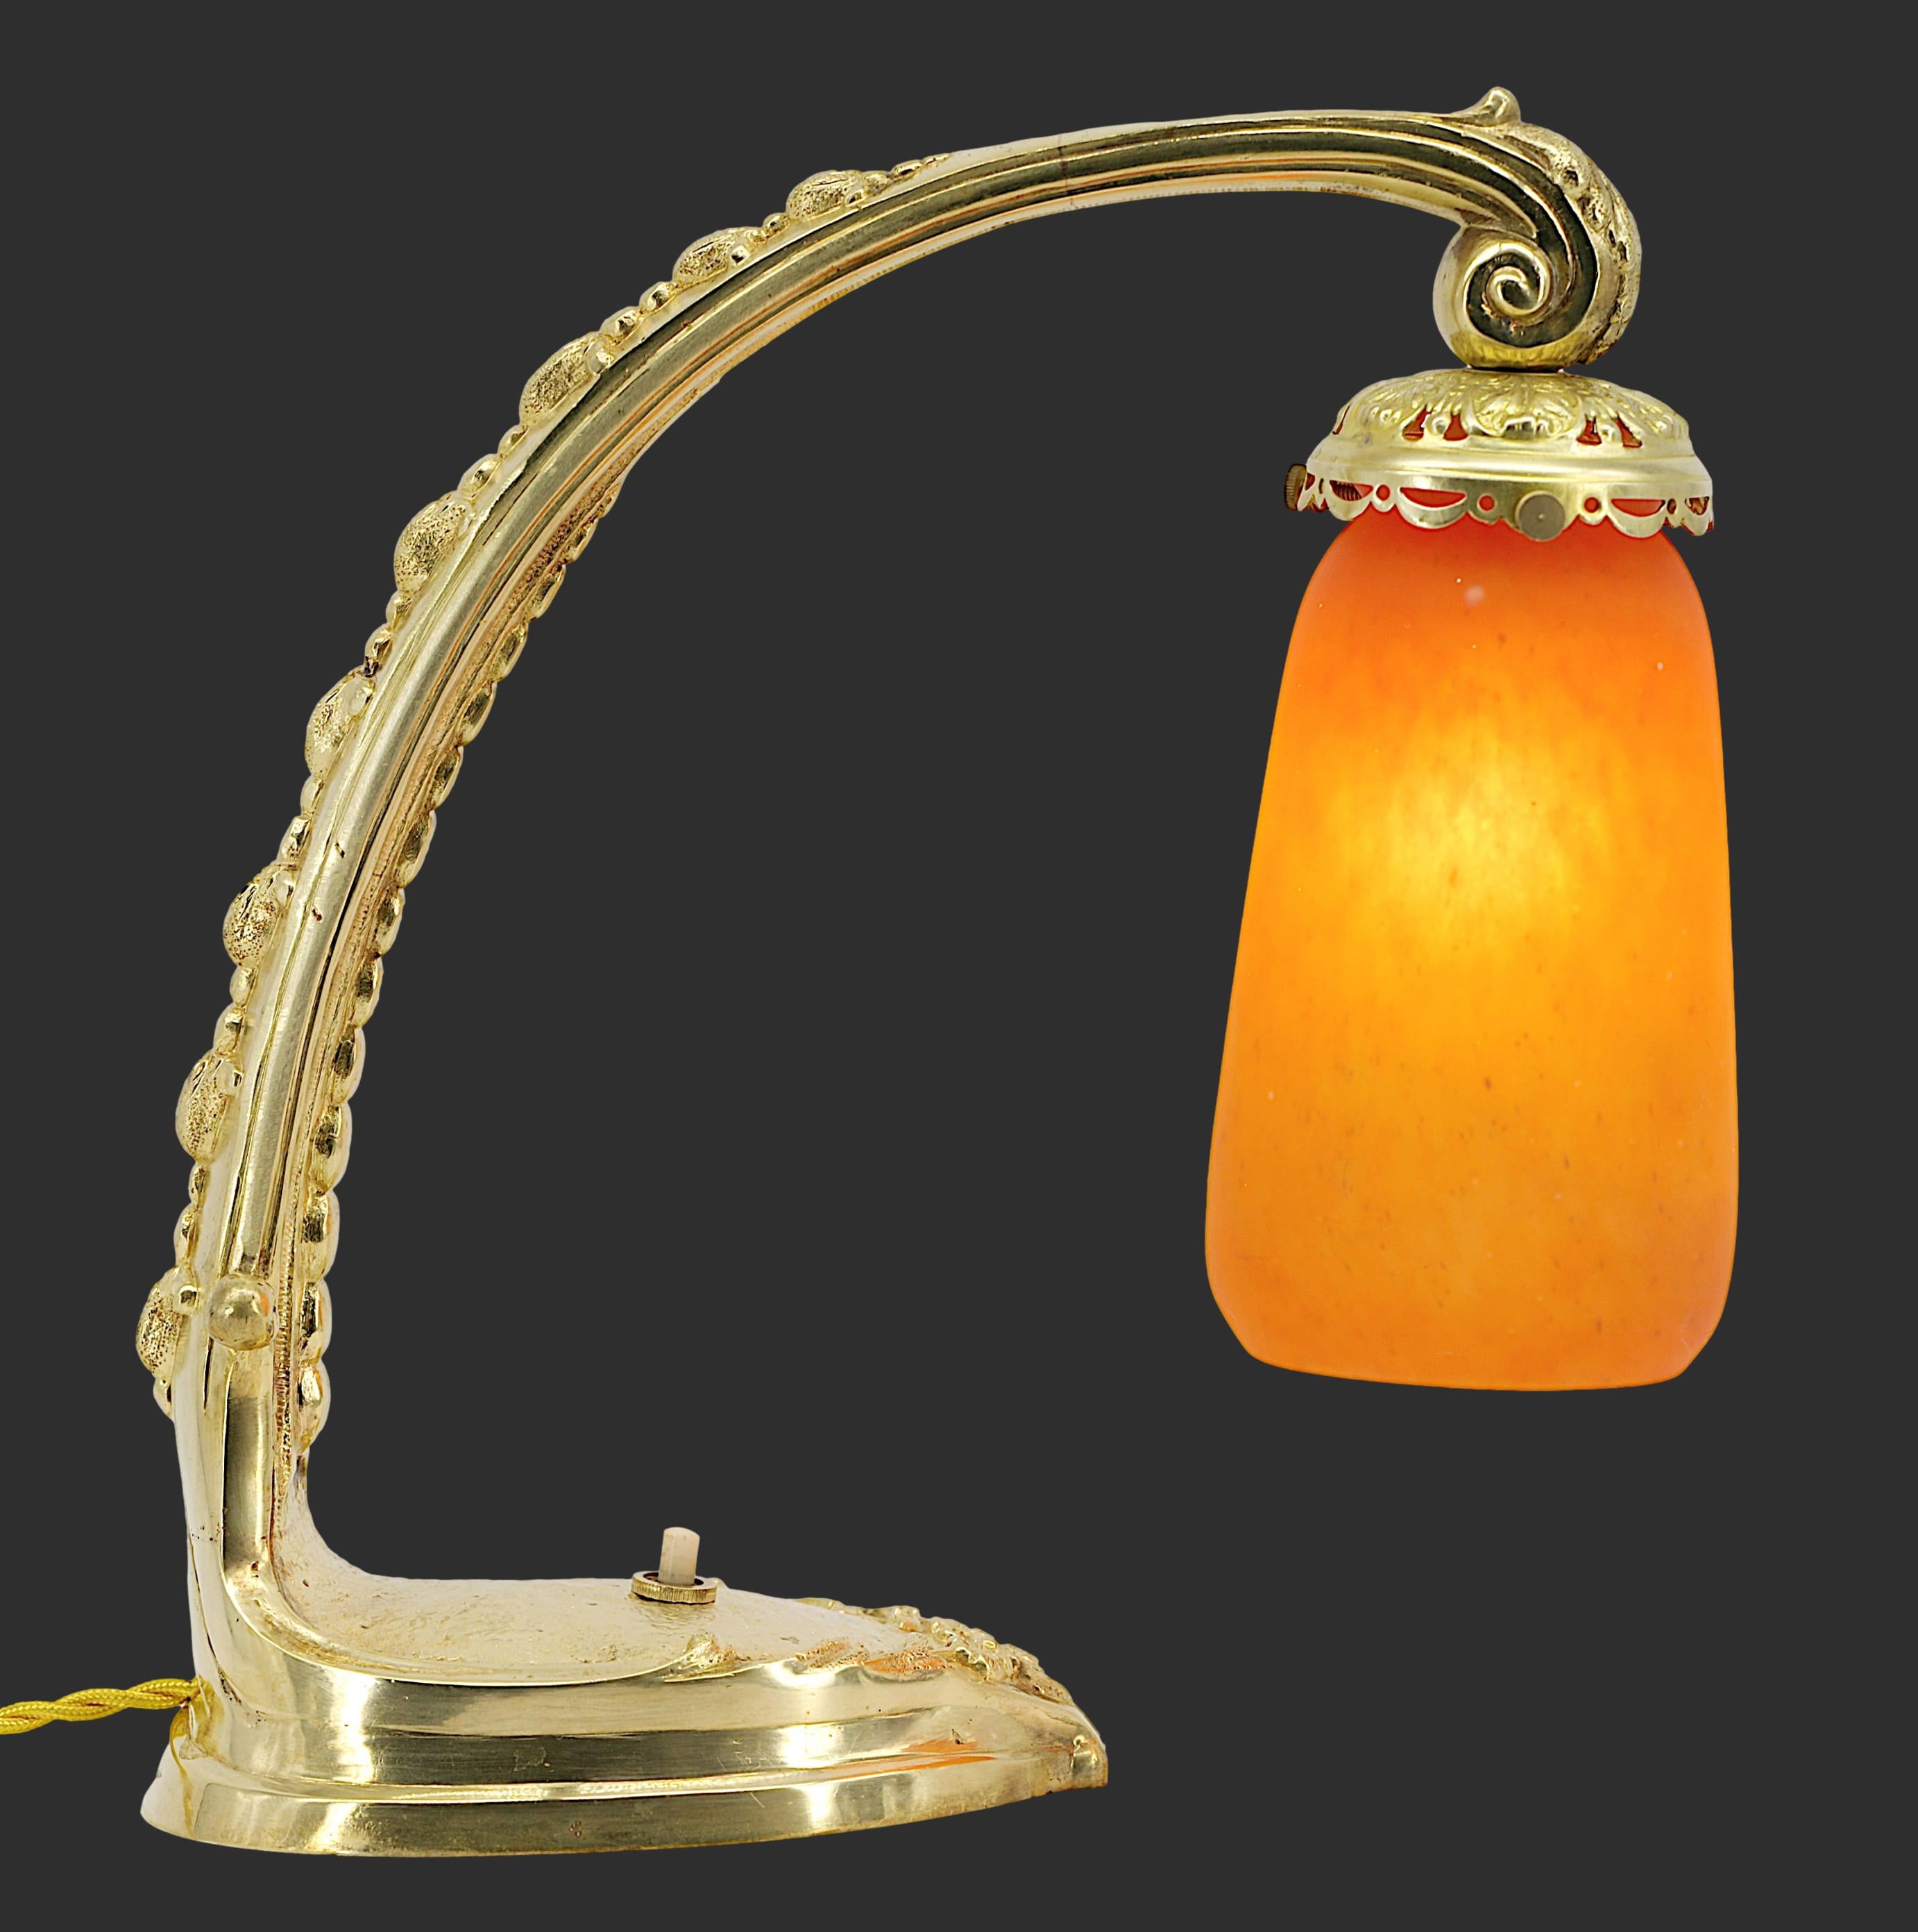 French table lamp by Daum (Nancy), France, ca.1915. Classy glass shade by Daum hung at its chiseled solid bronze base. Height : 10.6